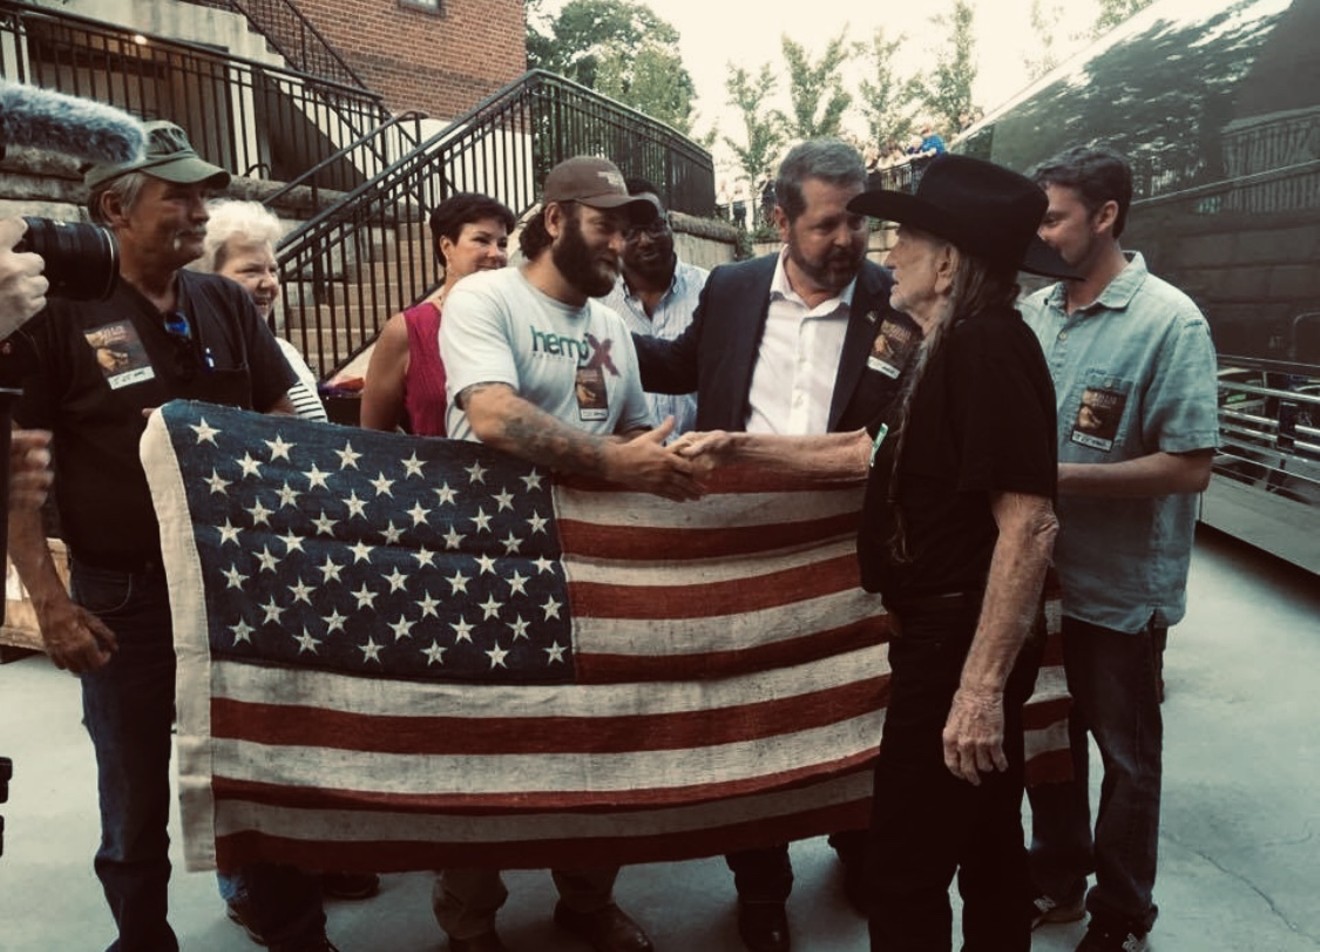 Michael Bowman (third from right upfront) meets with Willie Nelson as he holds his historic hemp flag after a Nelson performance in Charlottesville, Virginia.